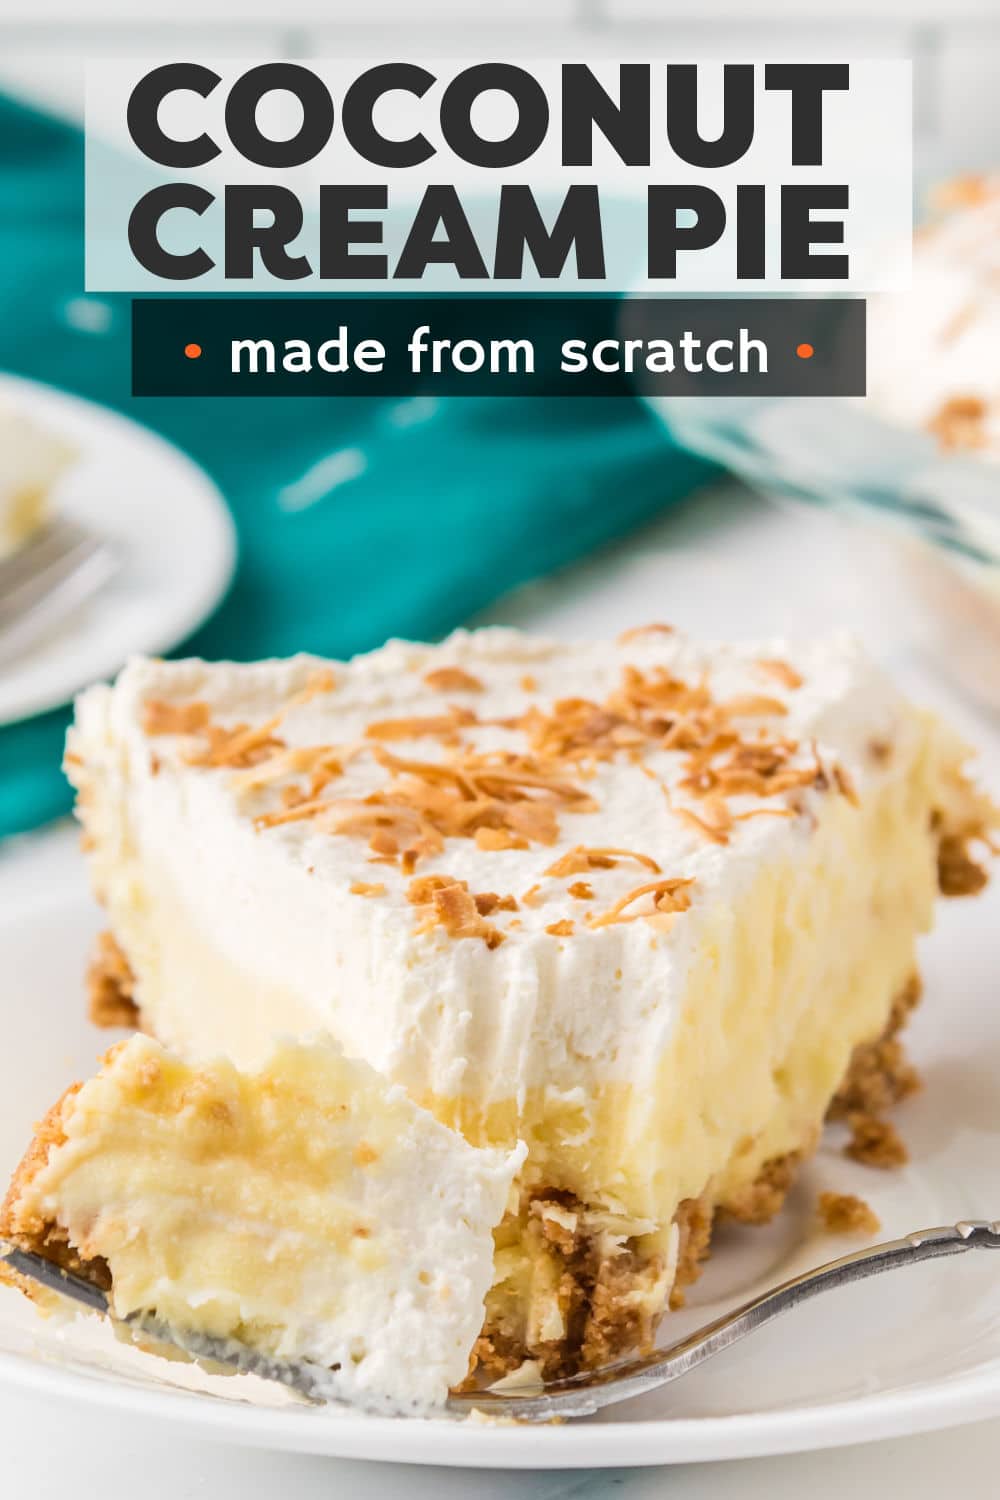 This coconut cream pie is entirely made from scratch and worth the effort. A thick coconut cream filling in a graham cracker crust, topped with fluffy whipped cream and toasted coconut. Tons of coconut flavor and the perfect creamy texture. | www.persnicketyplates.com